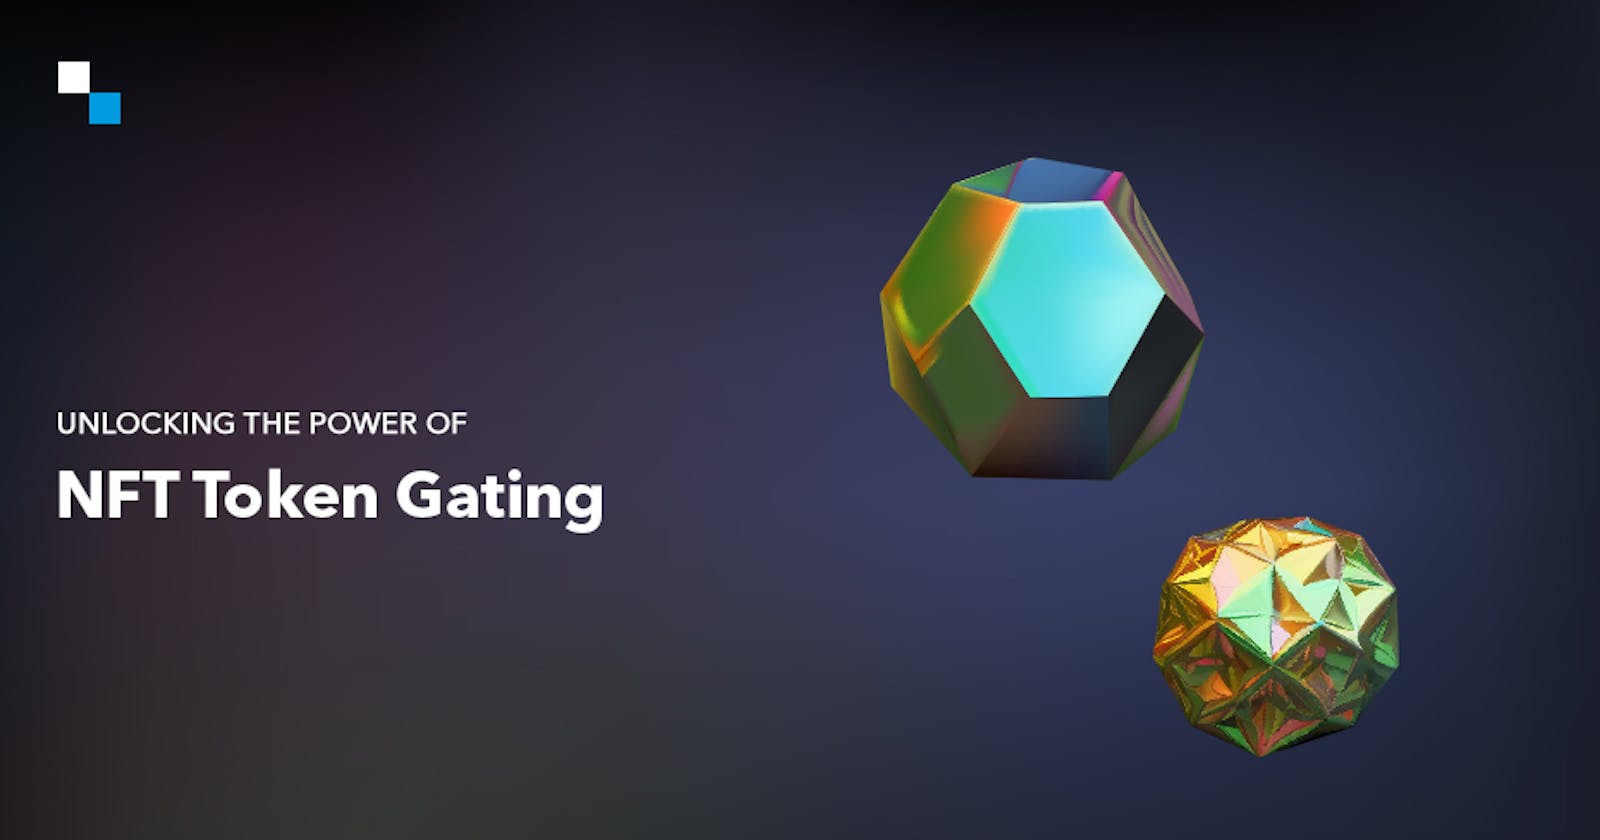 Gaining Exclusive Access with NFT Token Gating